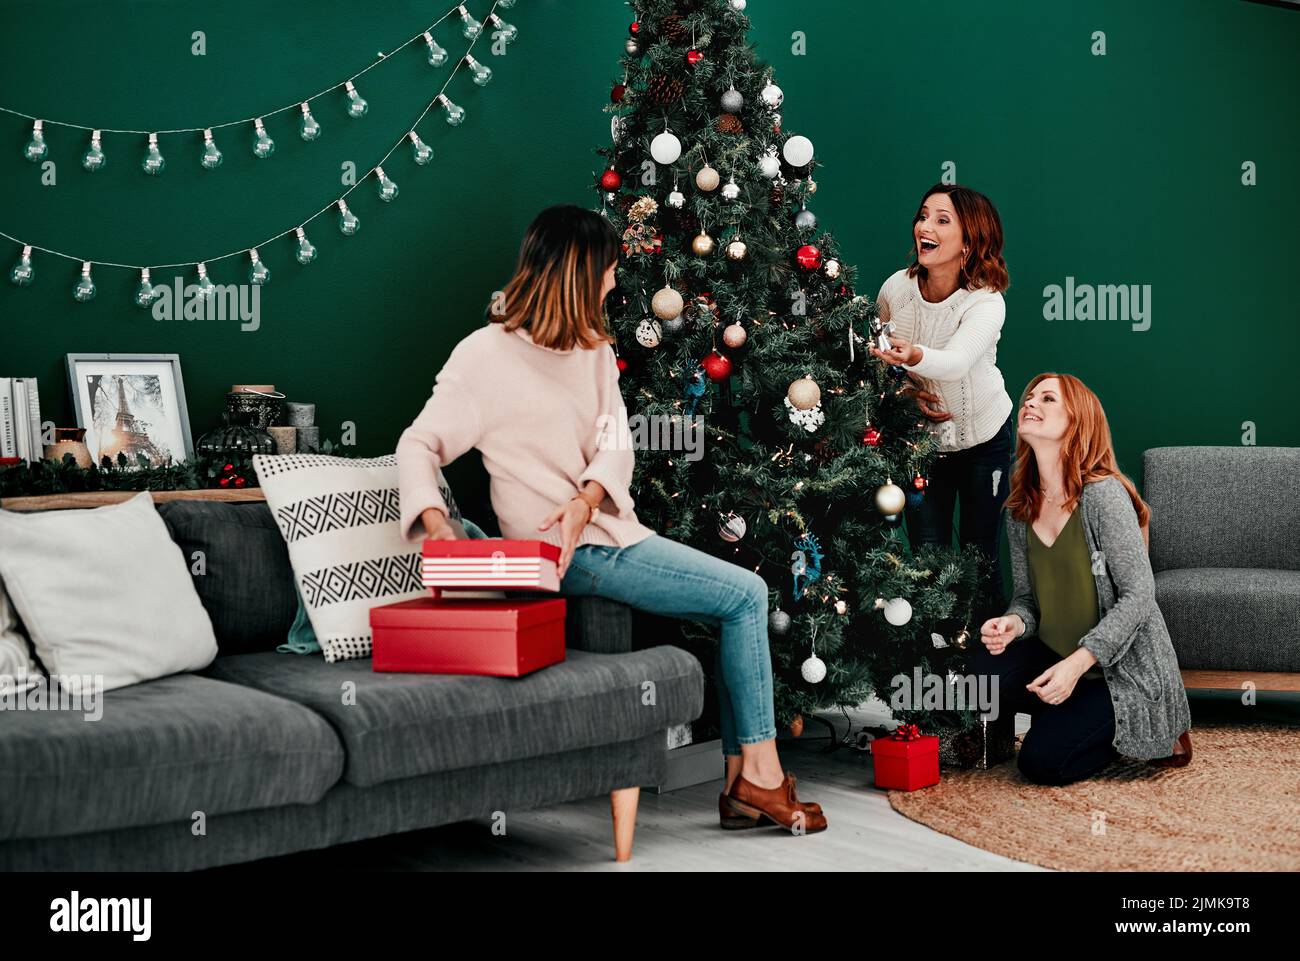 The tree is looking great. three attractive middle aged women decorating a Christmas tree together at home. Stock Photo